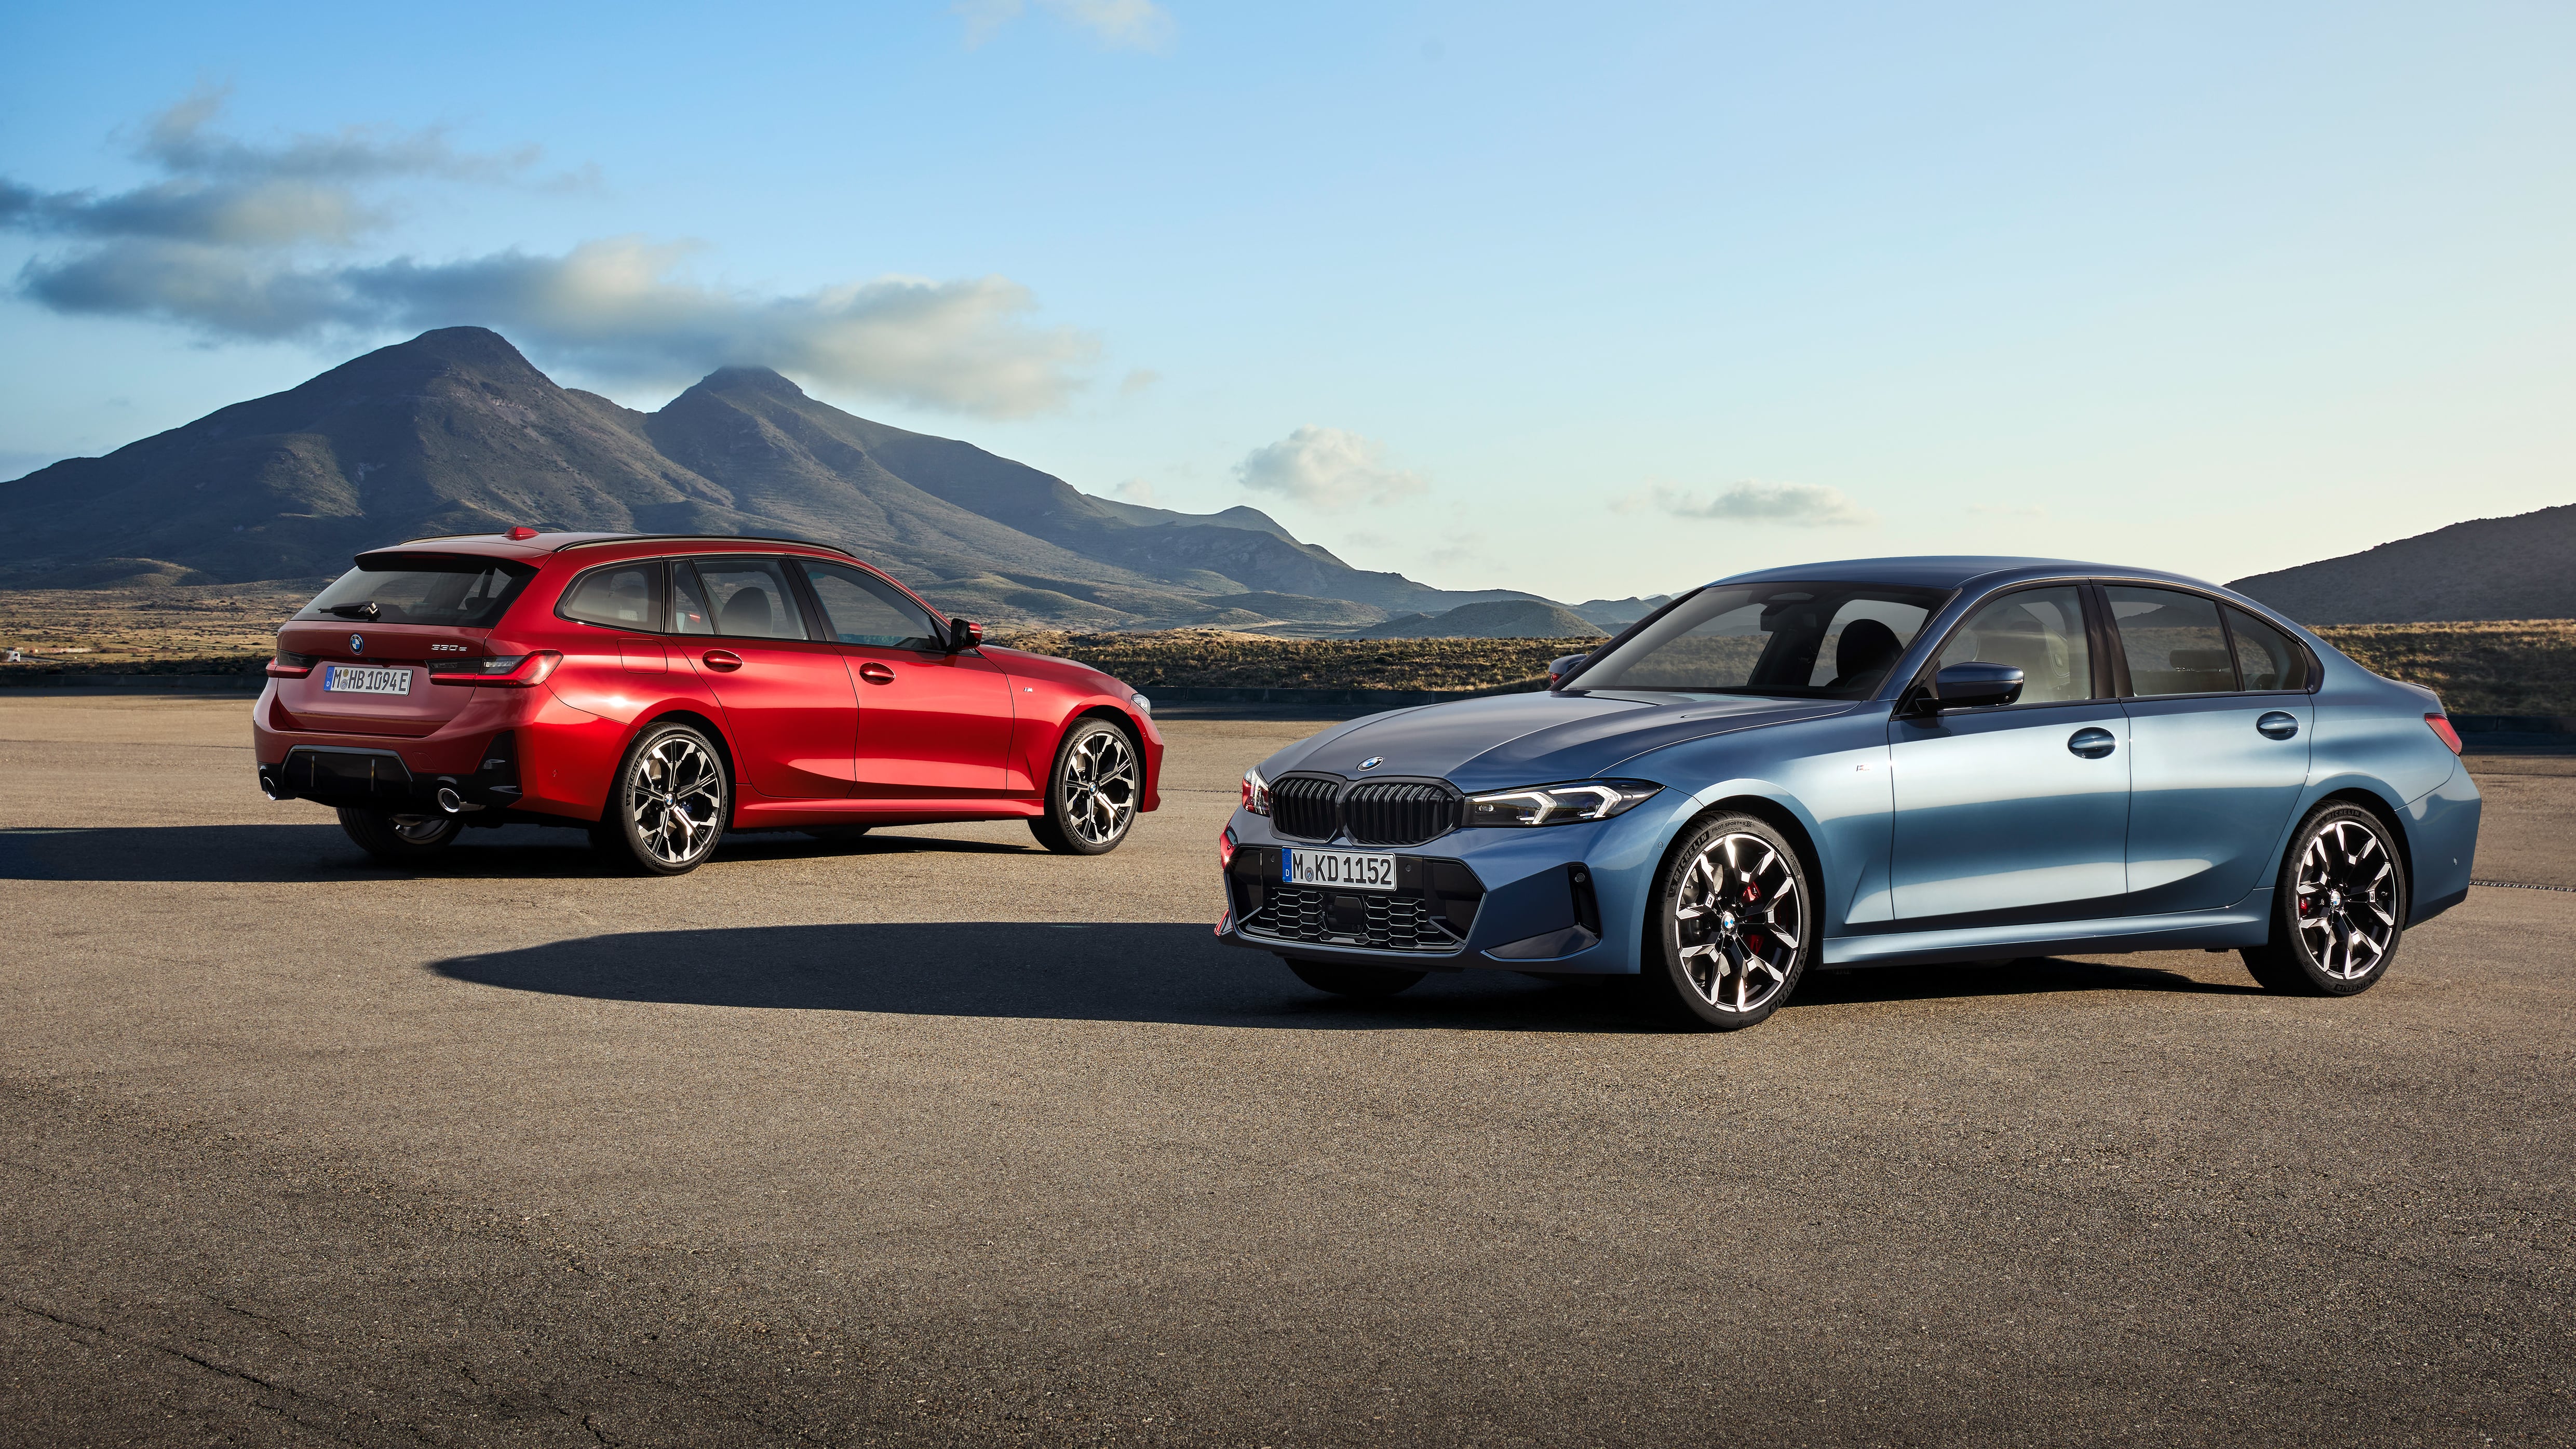 The 3 Series is one of BMW’s most successful models. (Credit: BMW Press)